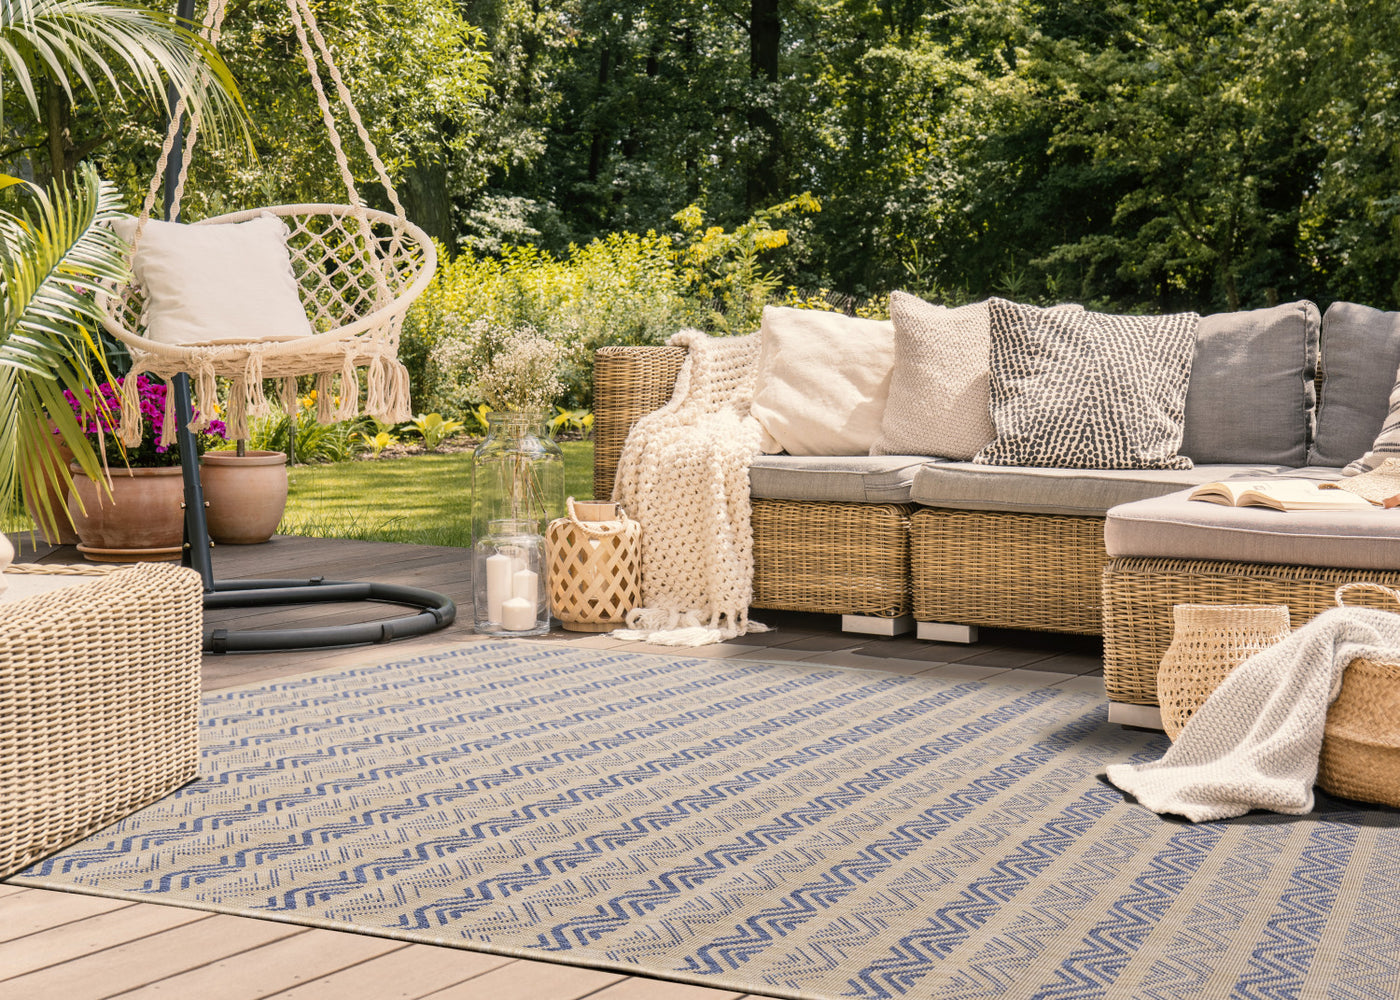 Camby 7'10" X 10'6" Indoor/Outdoor Geometric Stripes Rug - Blue Beige Area Rug